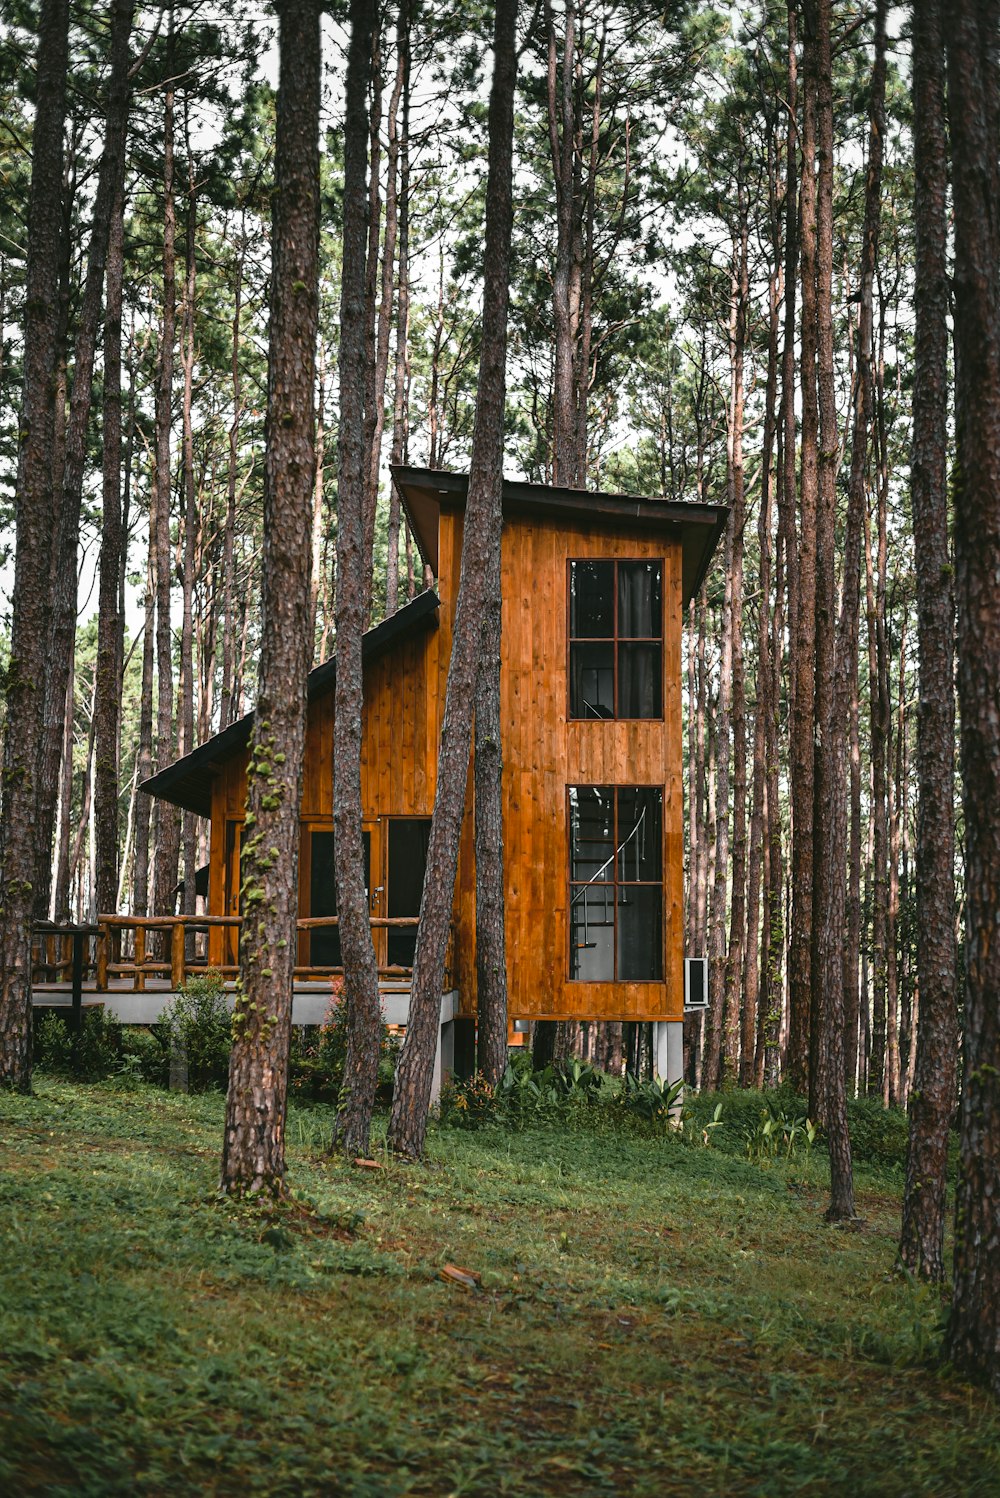 brown wooden house in forest during daytime